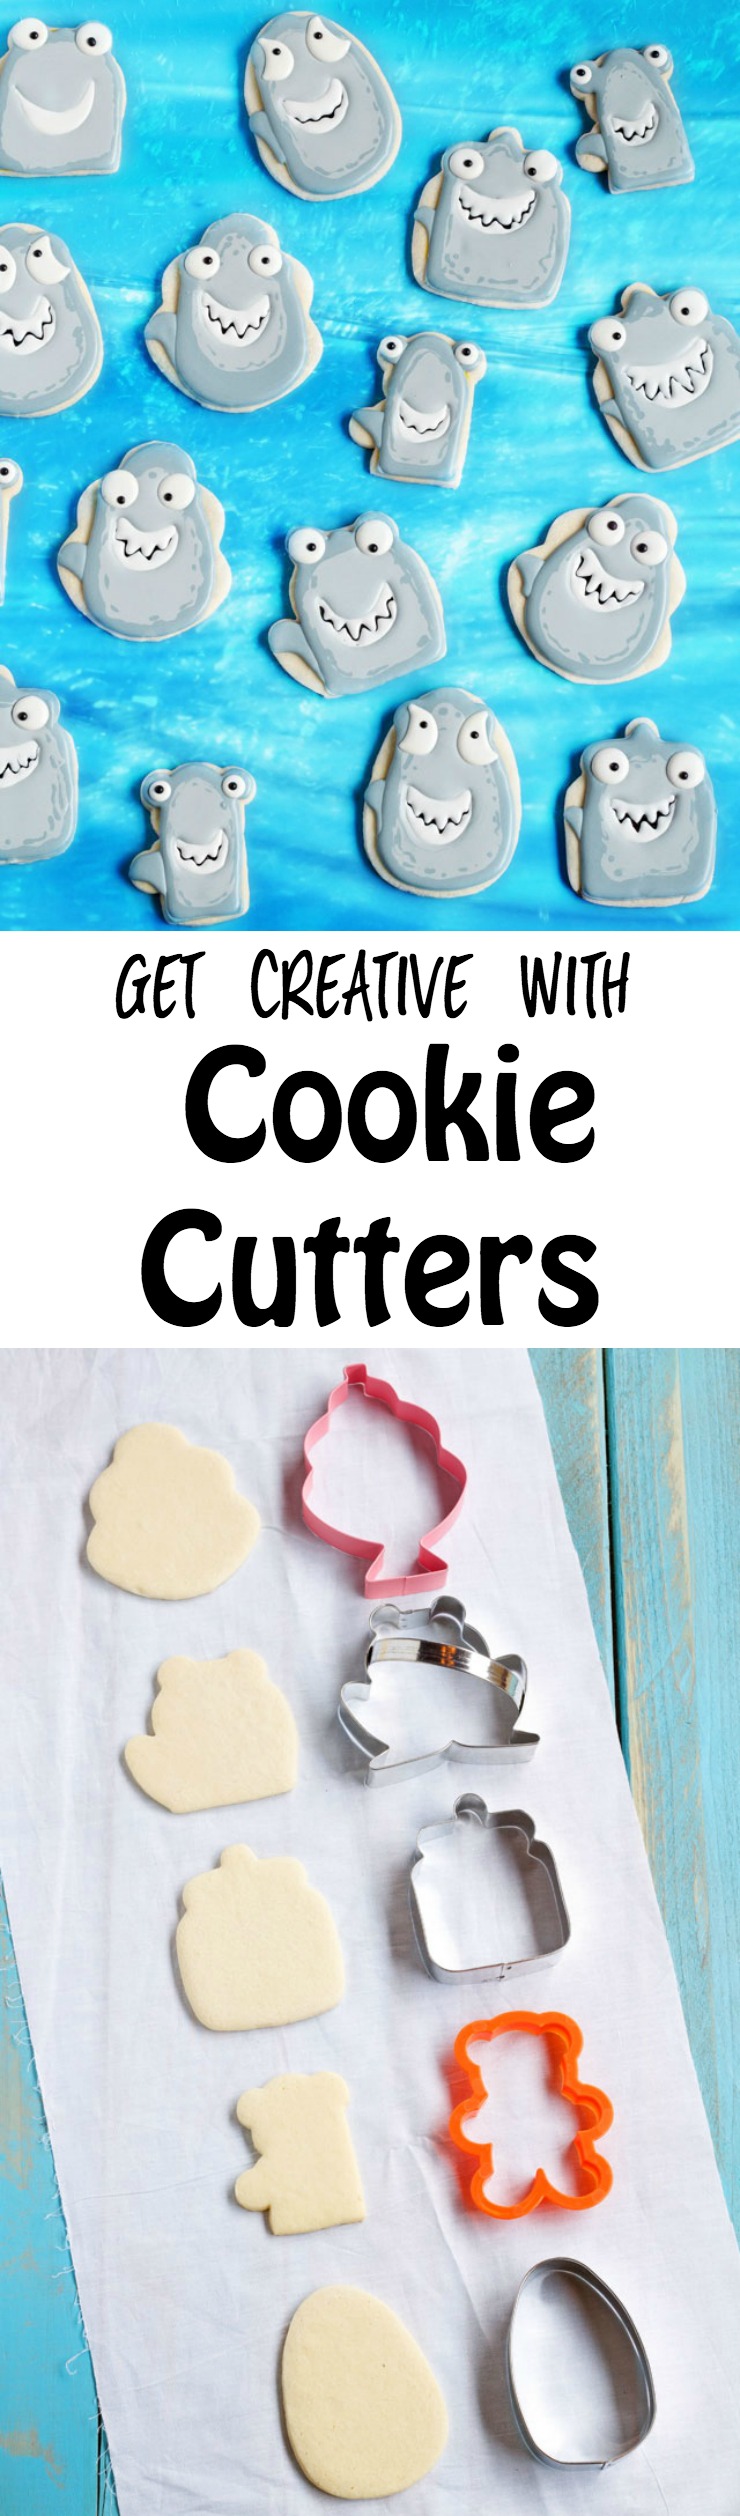 Get Creartvie with your cookies Cutters to make anything you want like this set of So Sharky Cookies | The Bearfoot Baker